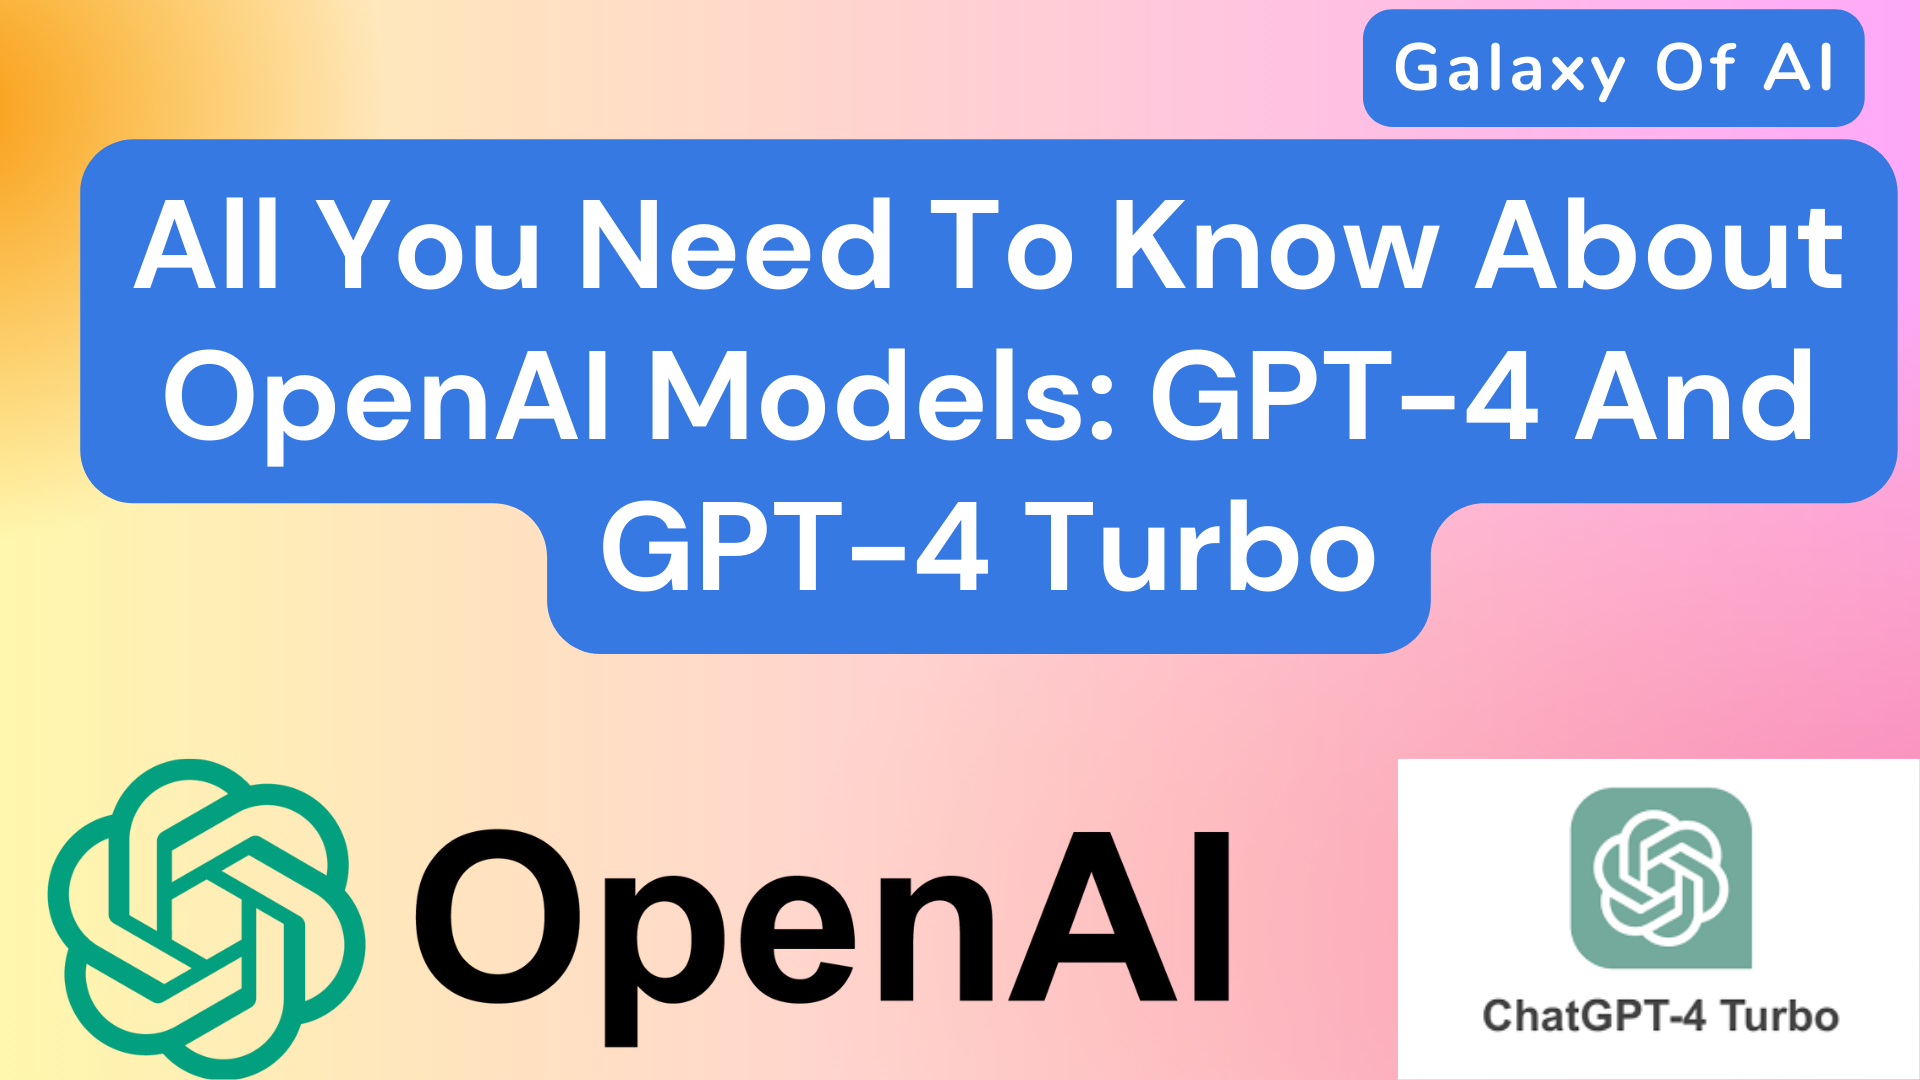 All You Need To Know About OpenAI Models: GPT-4 And GPT-4 Turbo